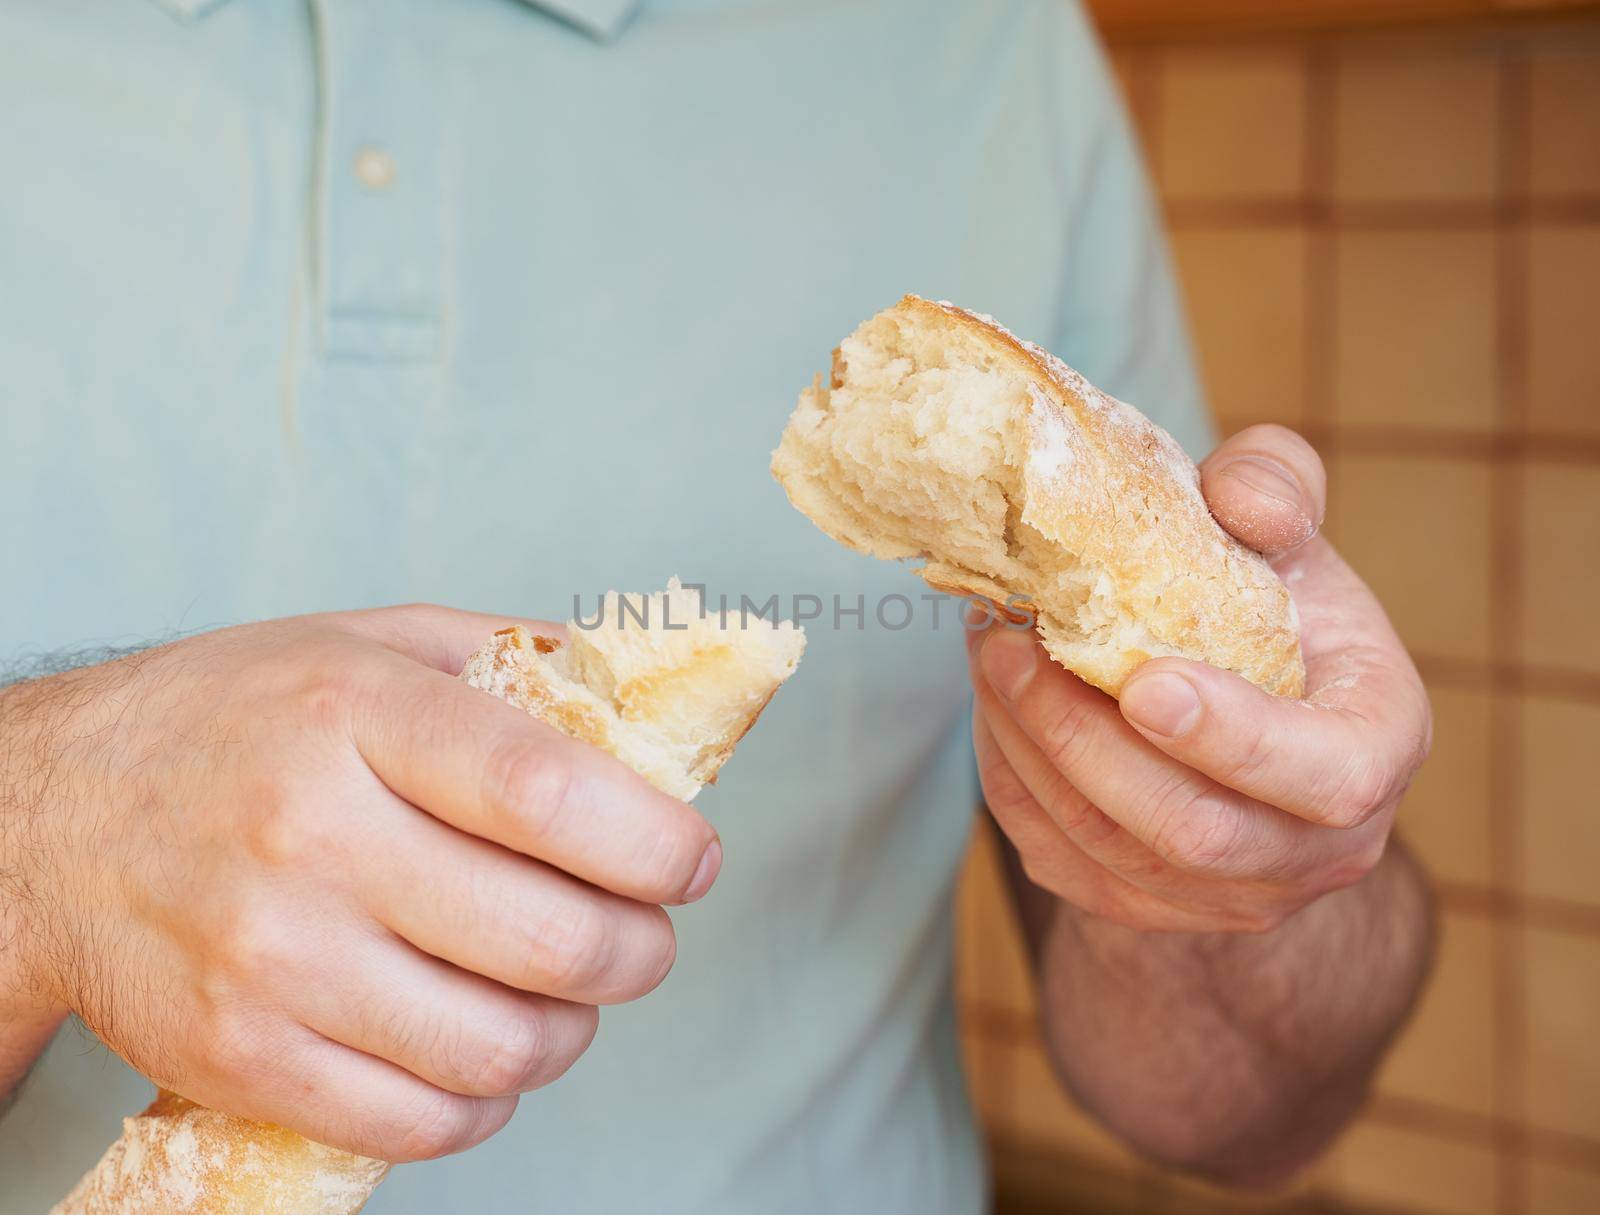 Man breaks off hunk of fresh baked homemade crusty bread baguette. Delicious and healthy homemade cakes. Hands close-up. Home atmosphere, cuisine.